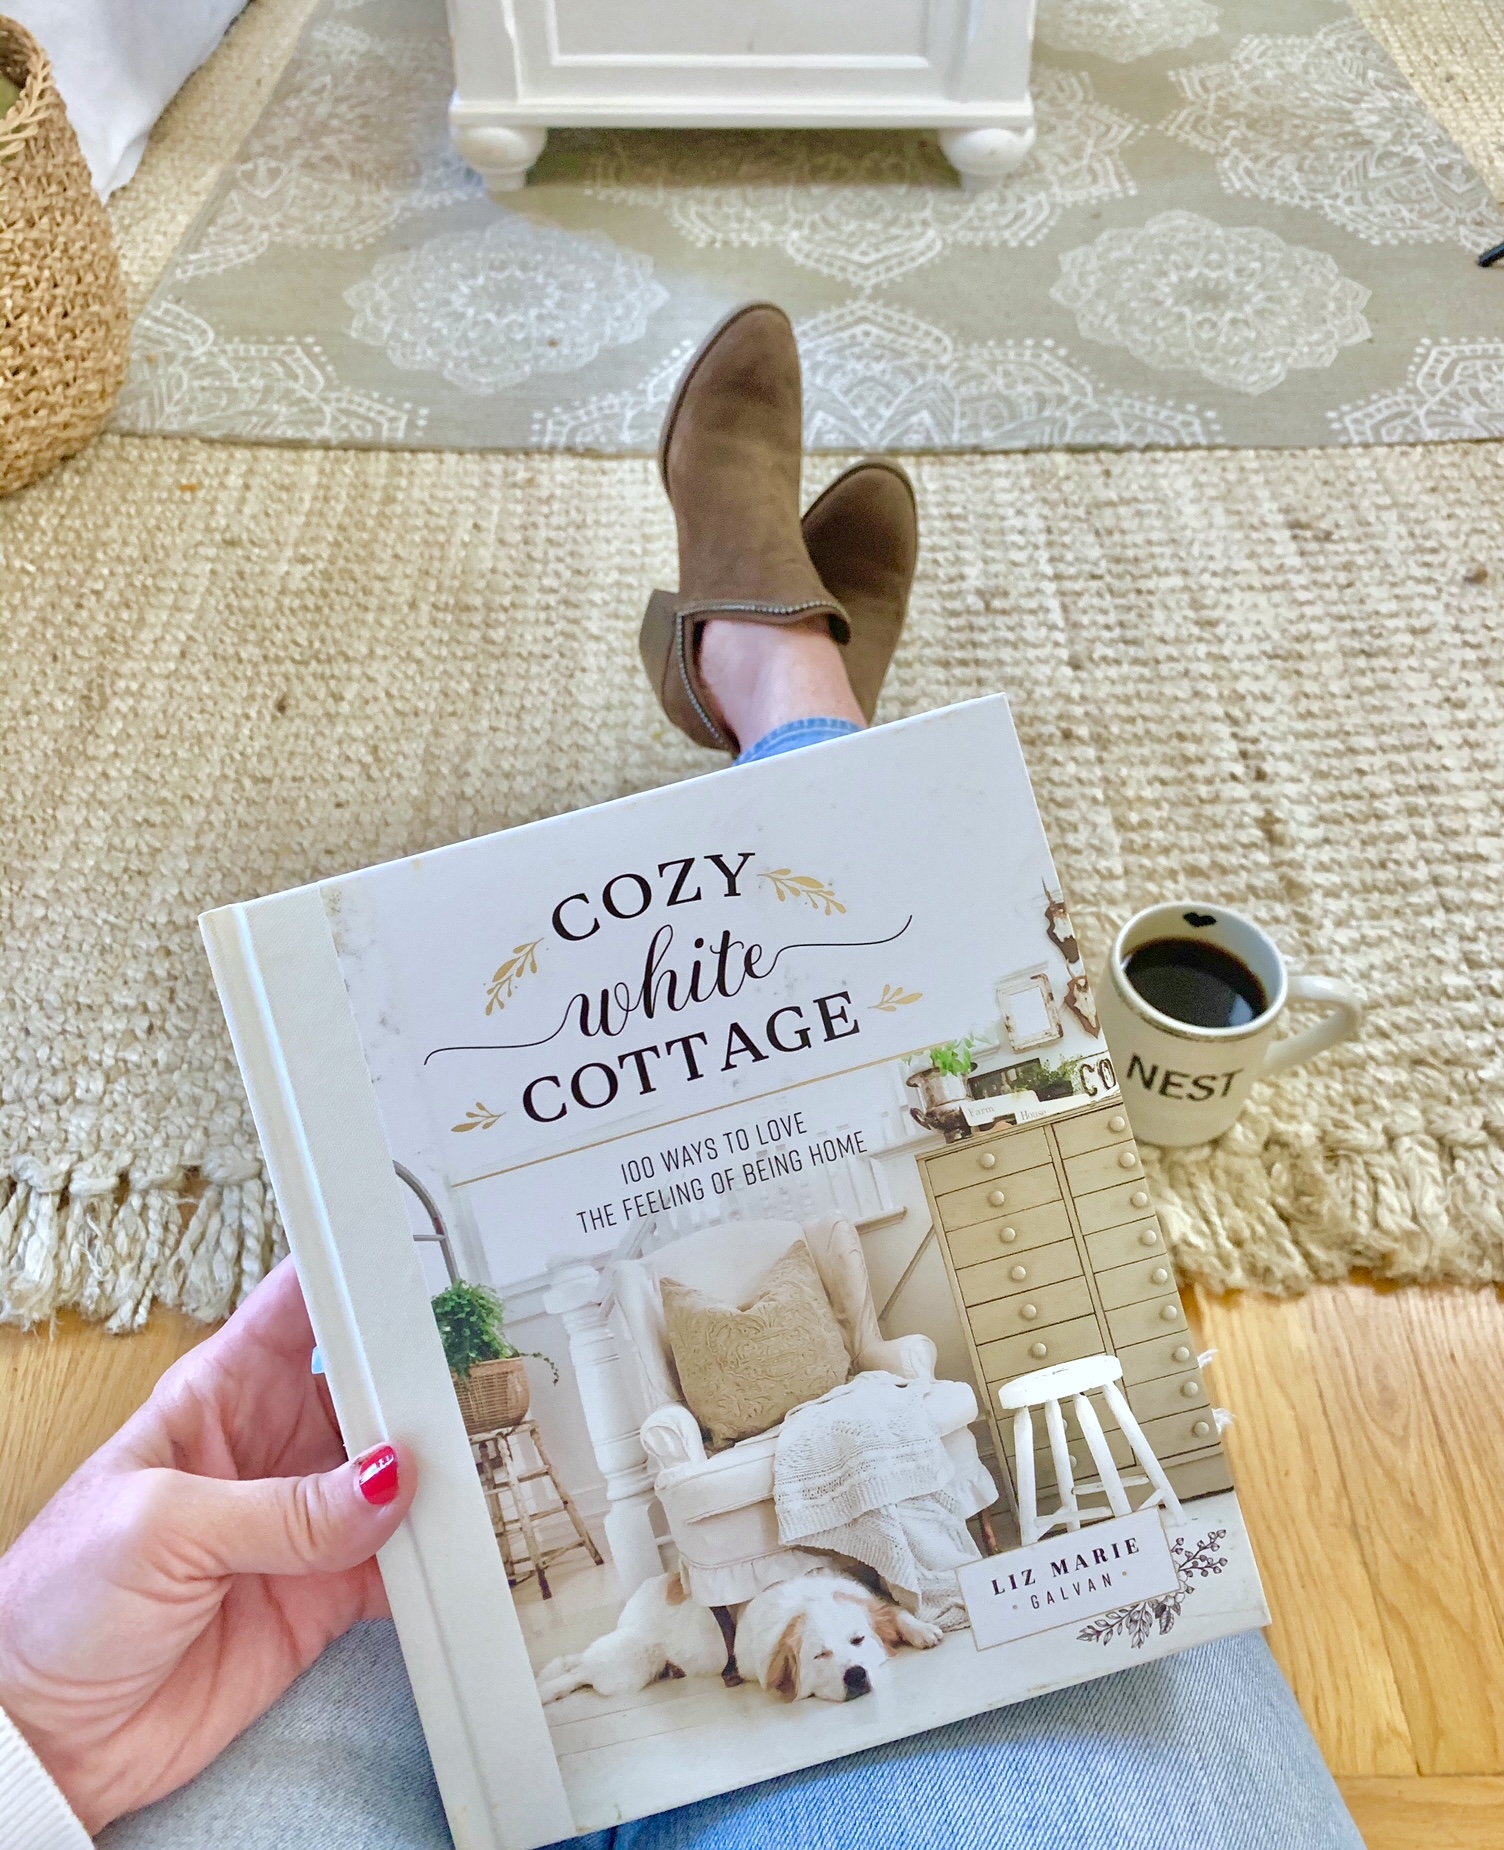 me holding cozy white cottage book from Liz marie galvin.